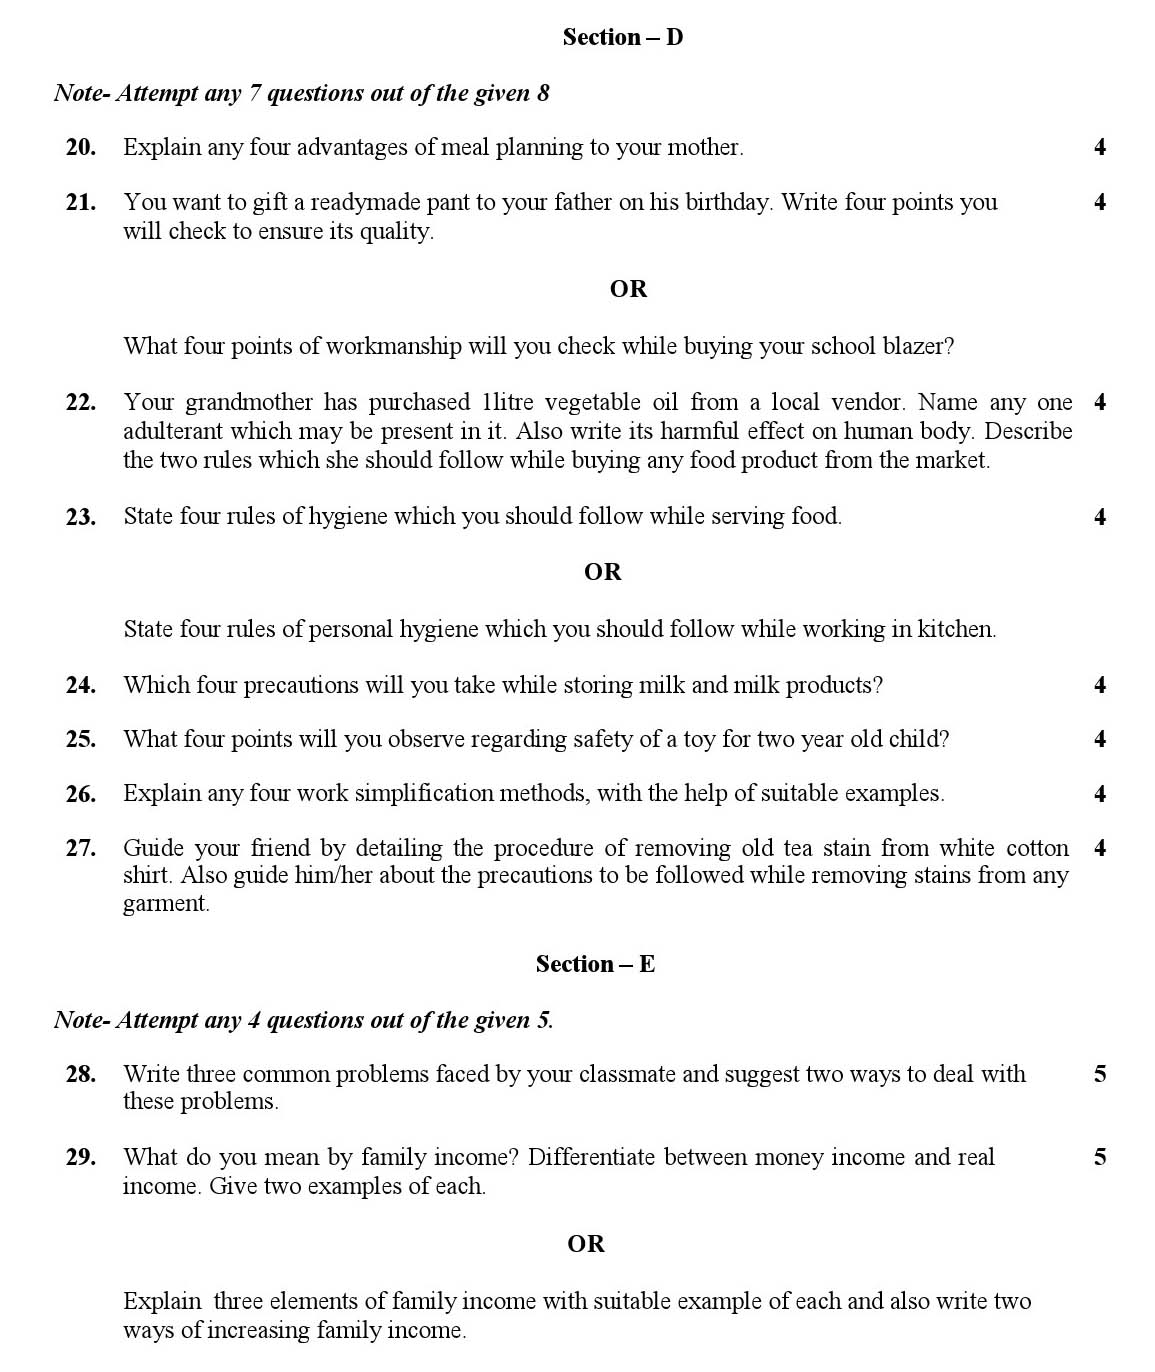 Home Science CBSE Class X Sample Question Paper 2018-19 - Image 3